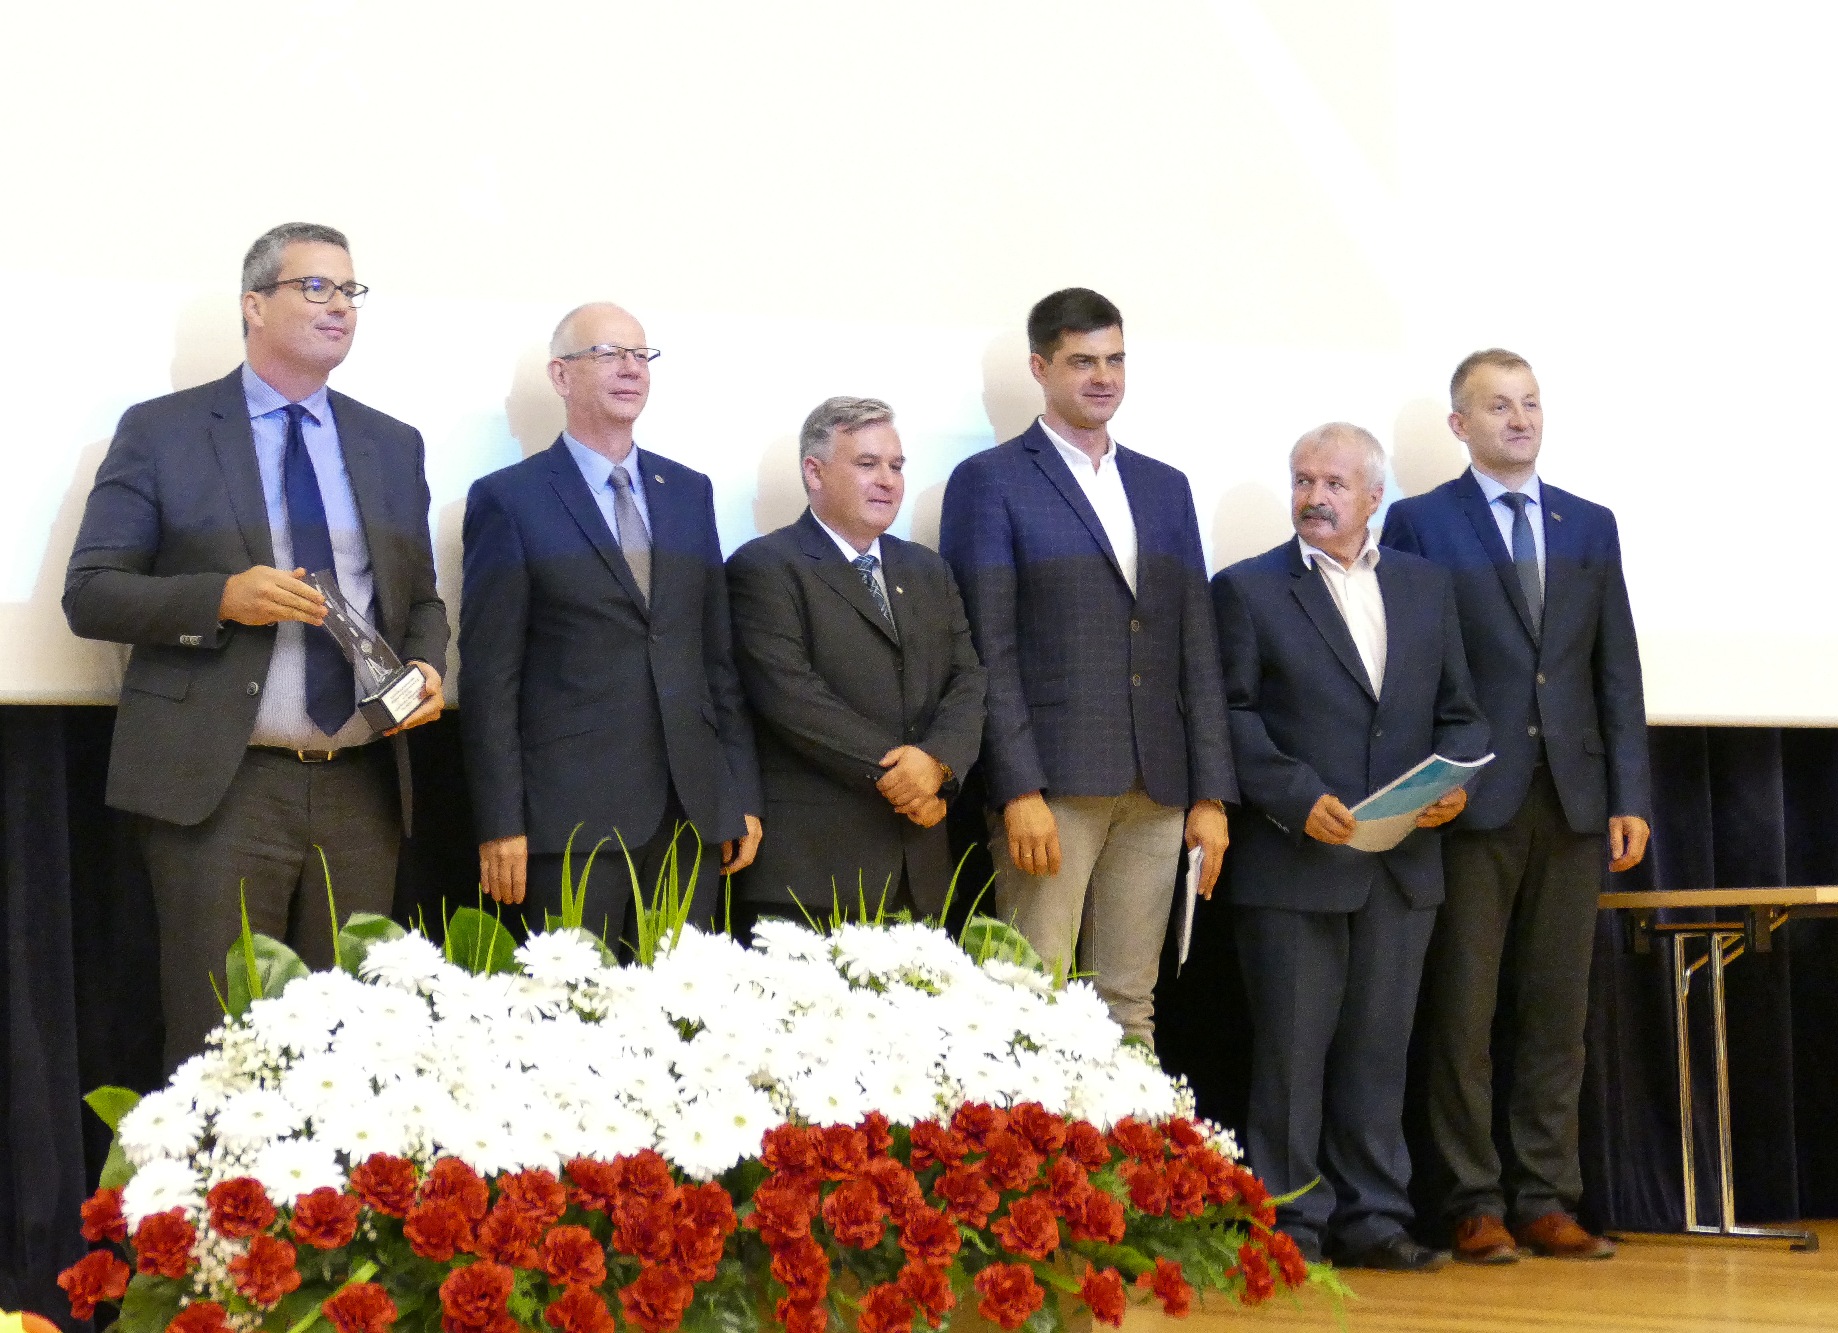 Aldesa - Aldesa awarded in the competition “Construction of the Year Podkarpacie 2017” for the implementation of the S-19 expressway